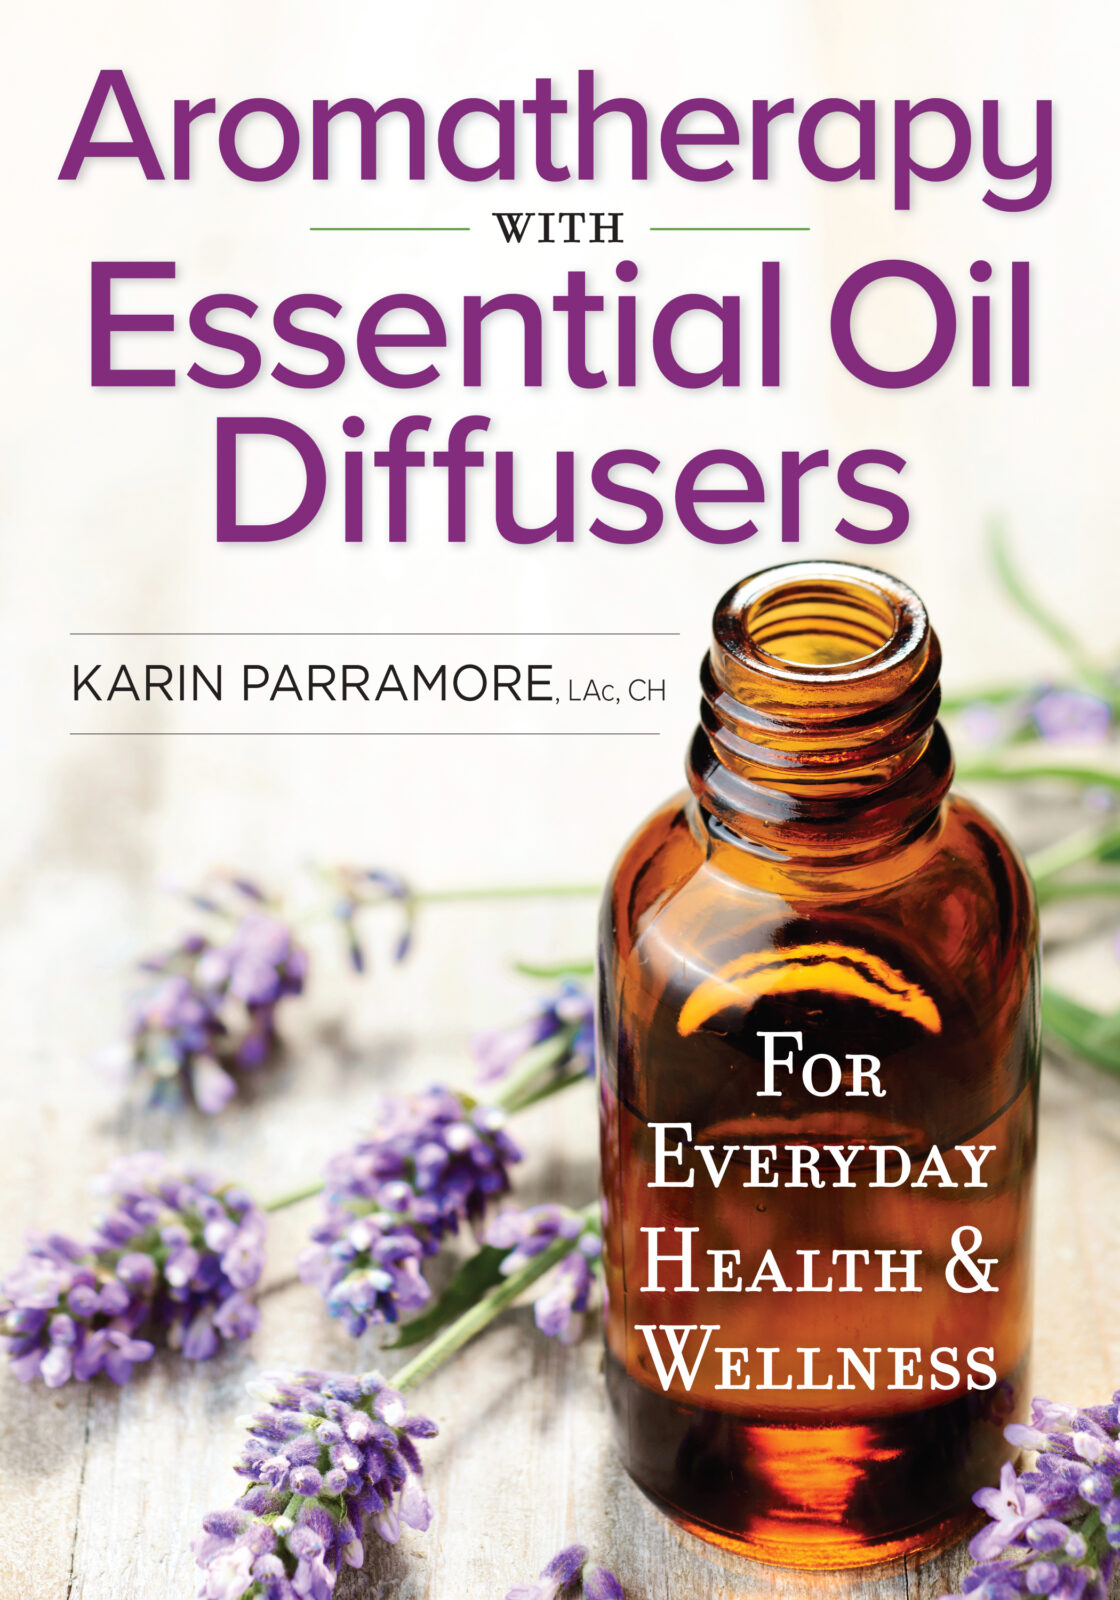 Aromatherapy with Essential Oil Diffusers